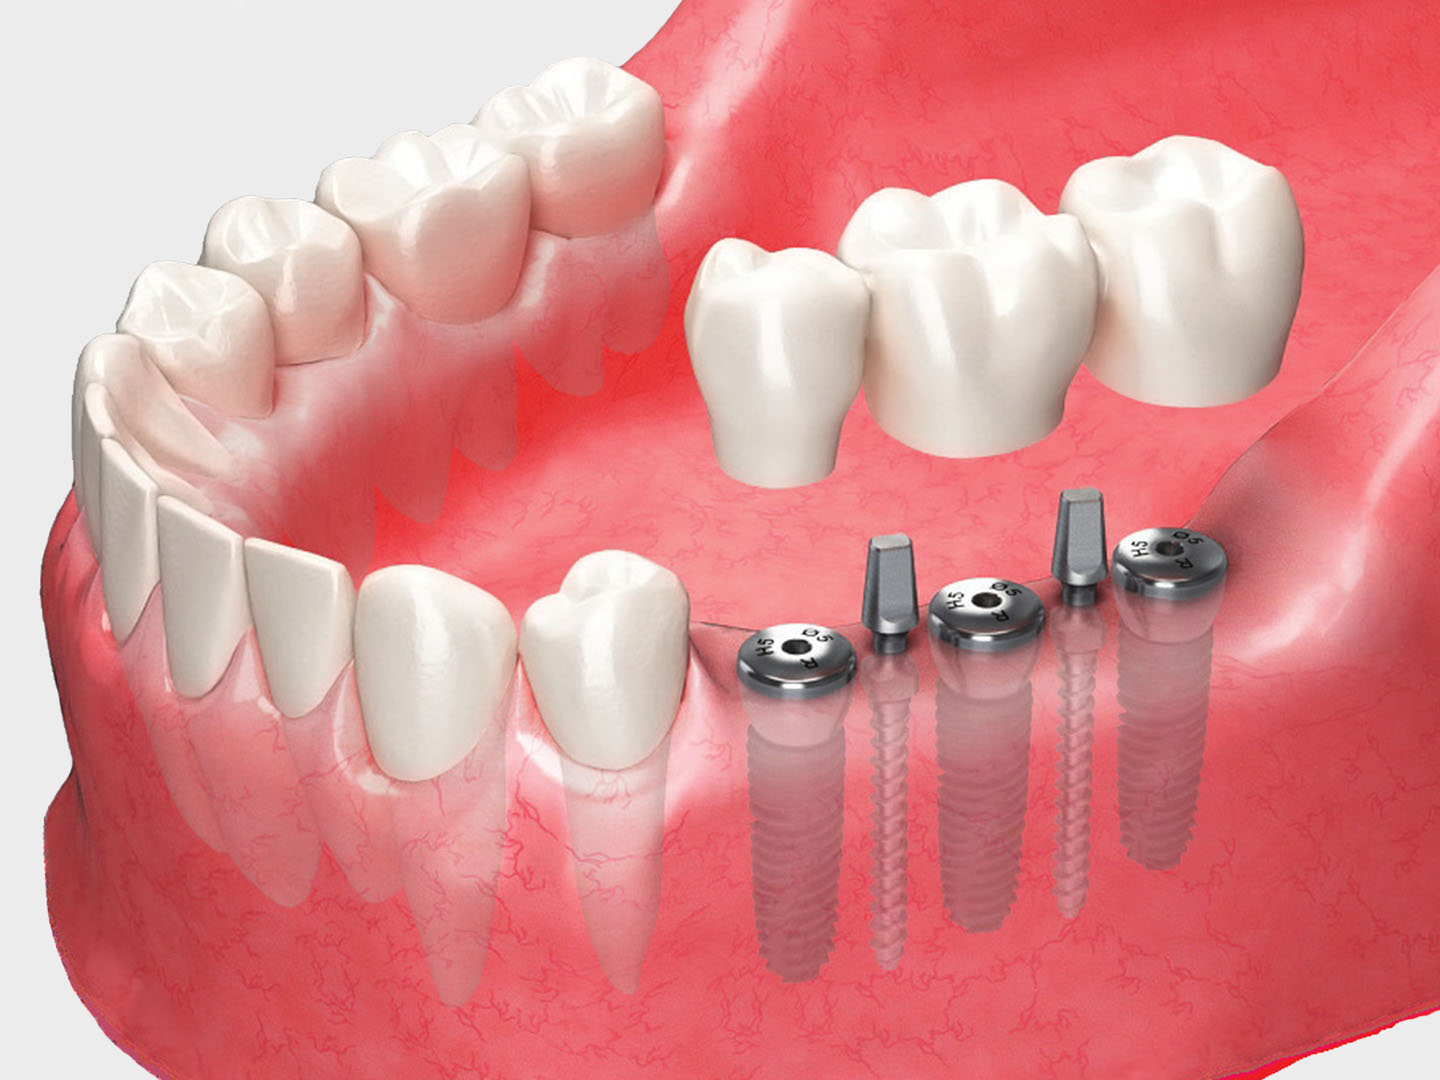 provisional-implant-ms-system.jpg